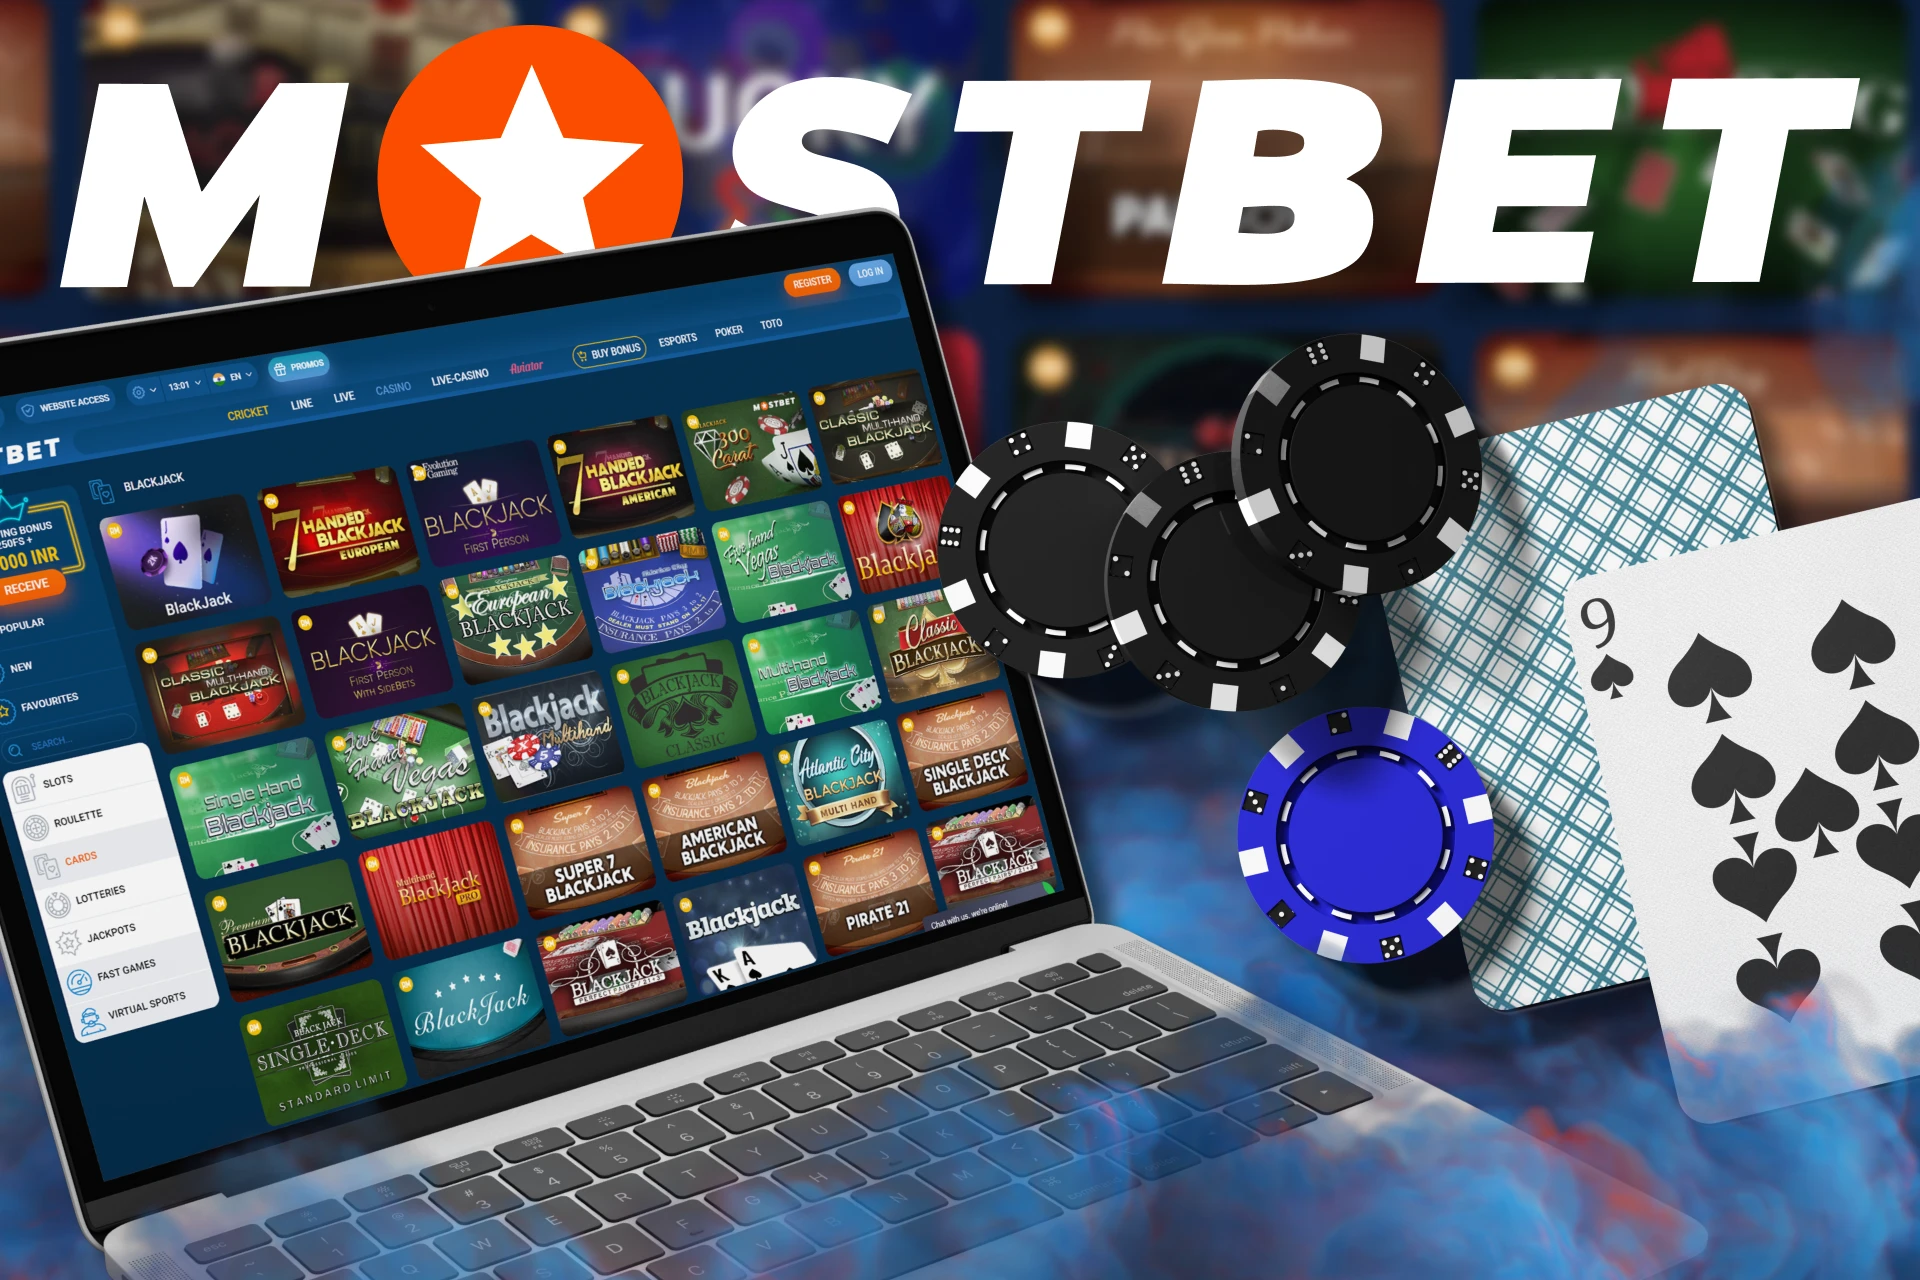 Go to Mostbet to play the most popular card game blackjack.